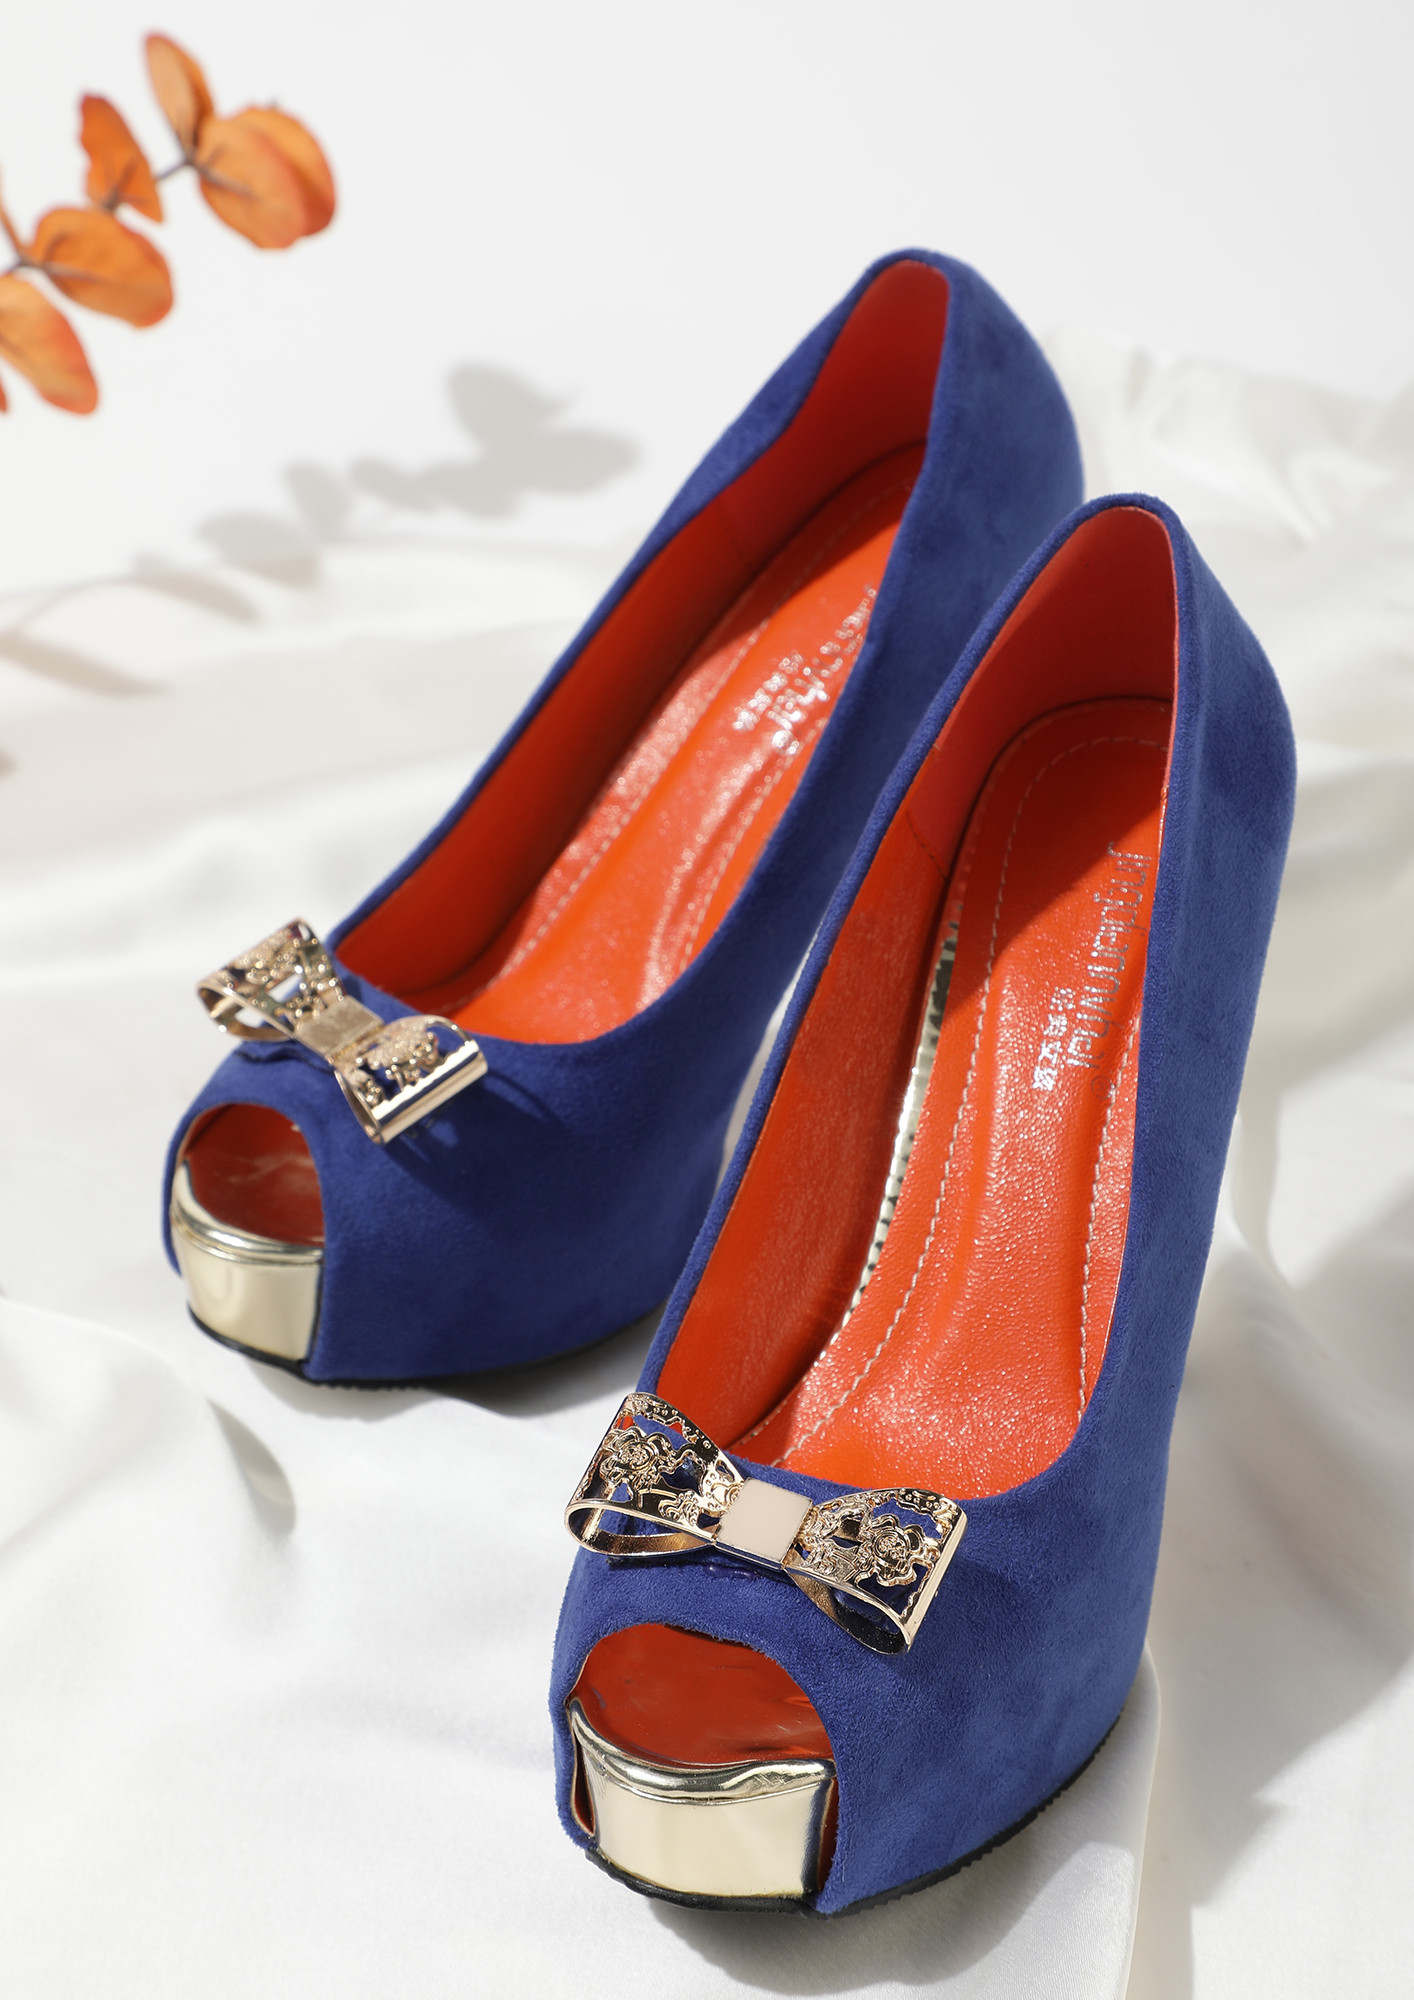 Get Your Bow On BLUE Peep-Toe Pumps